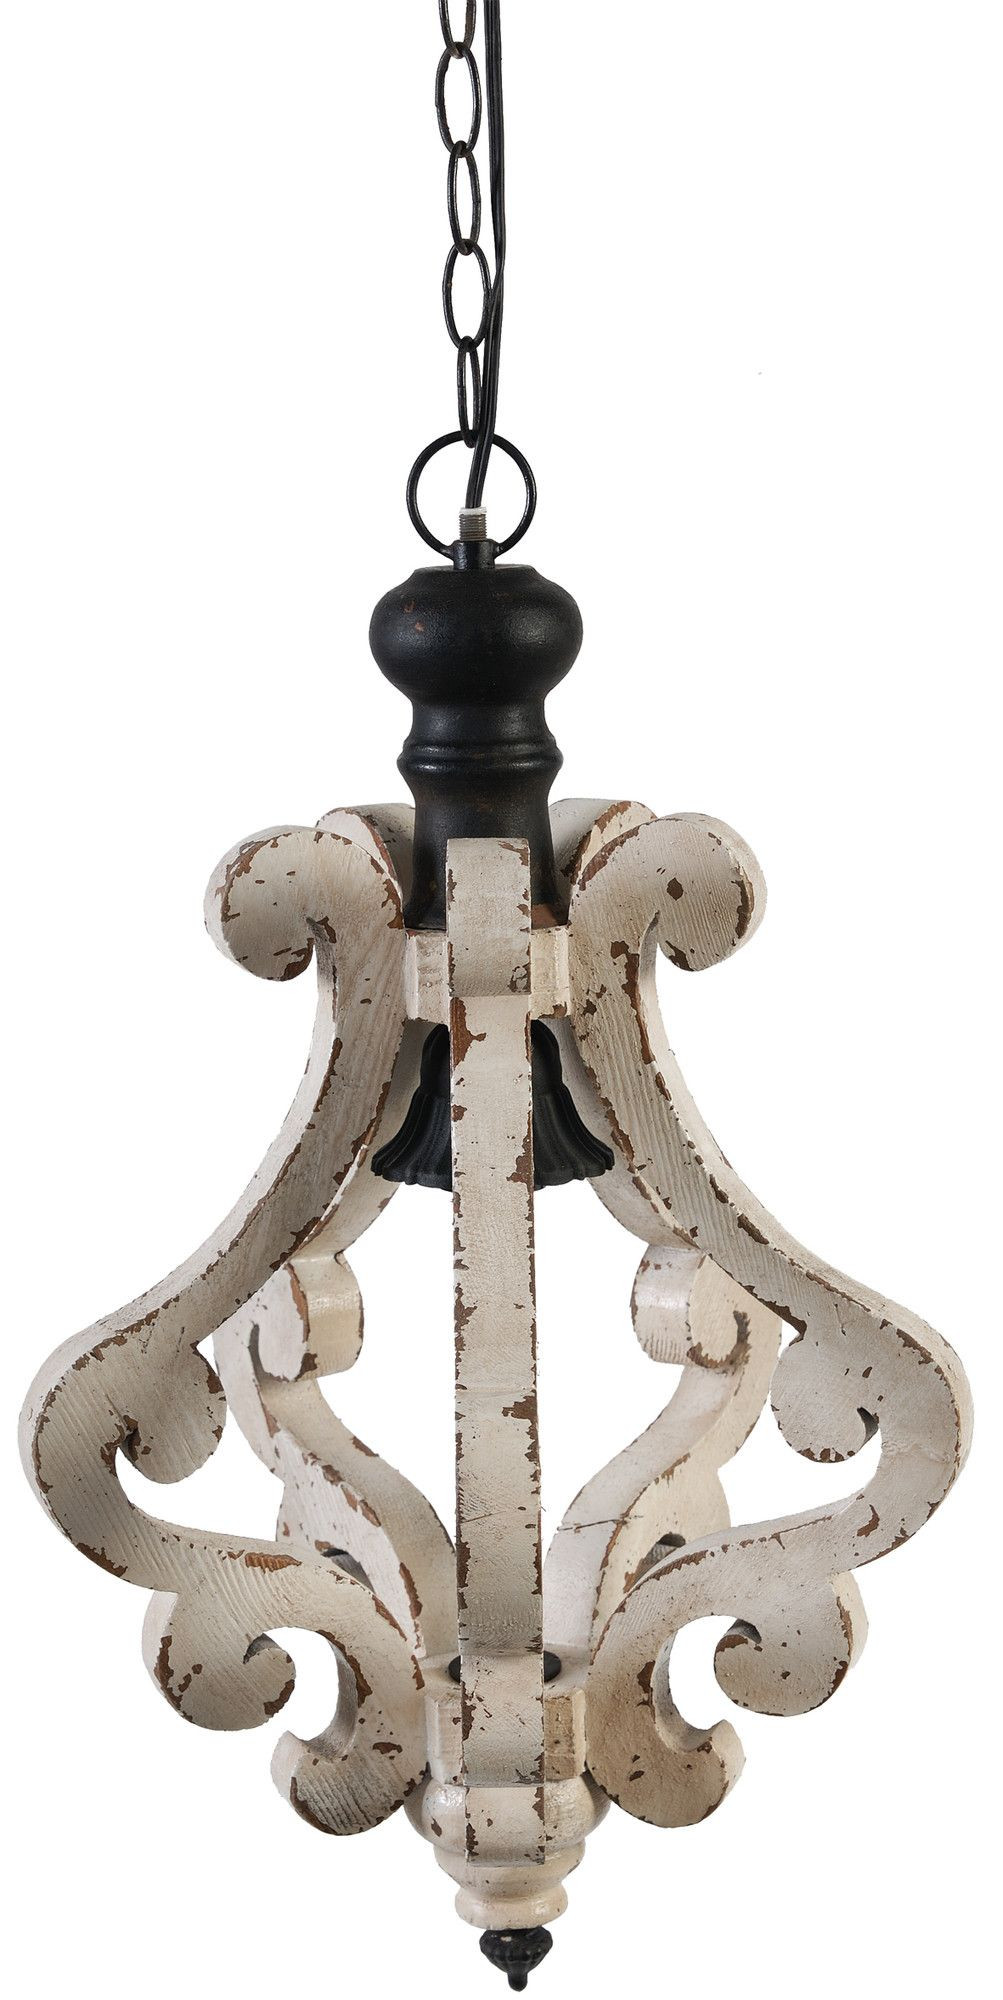 French Country Kitchen Pendant Lighting
 Frances Pendant $89 95 French Country Decor on Joss